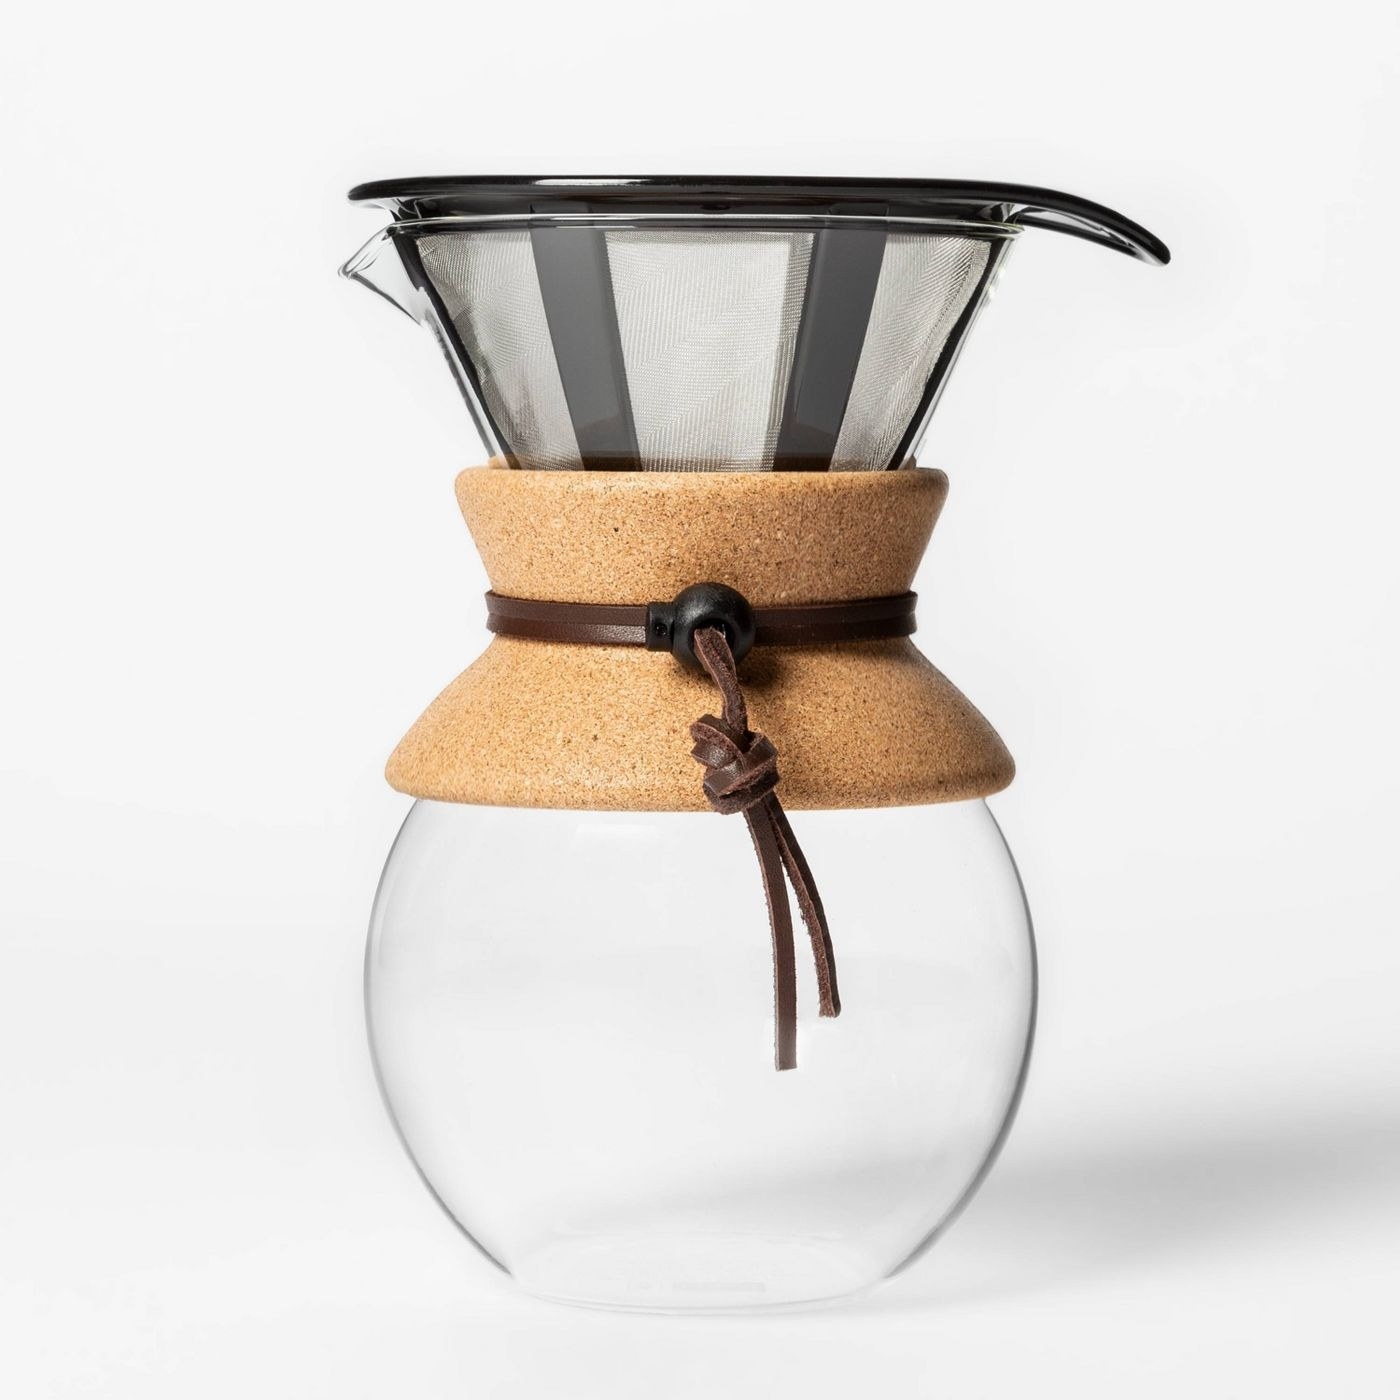 The pour over coffee maker